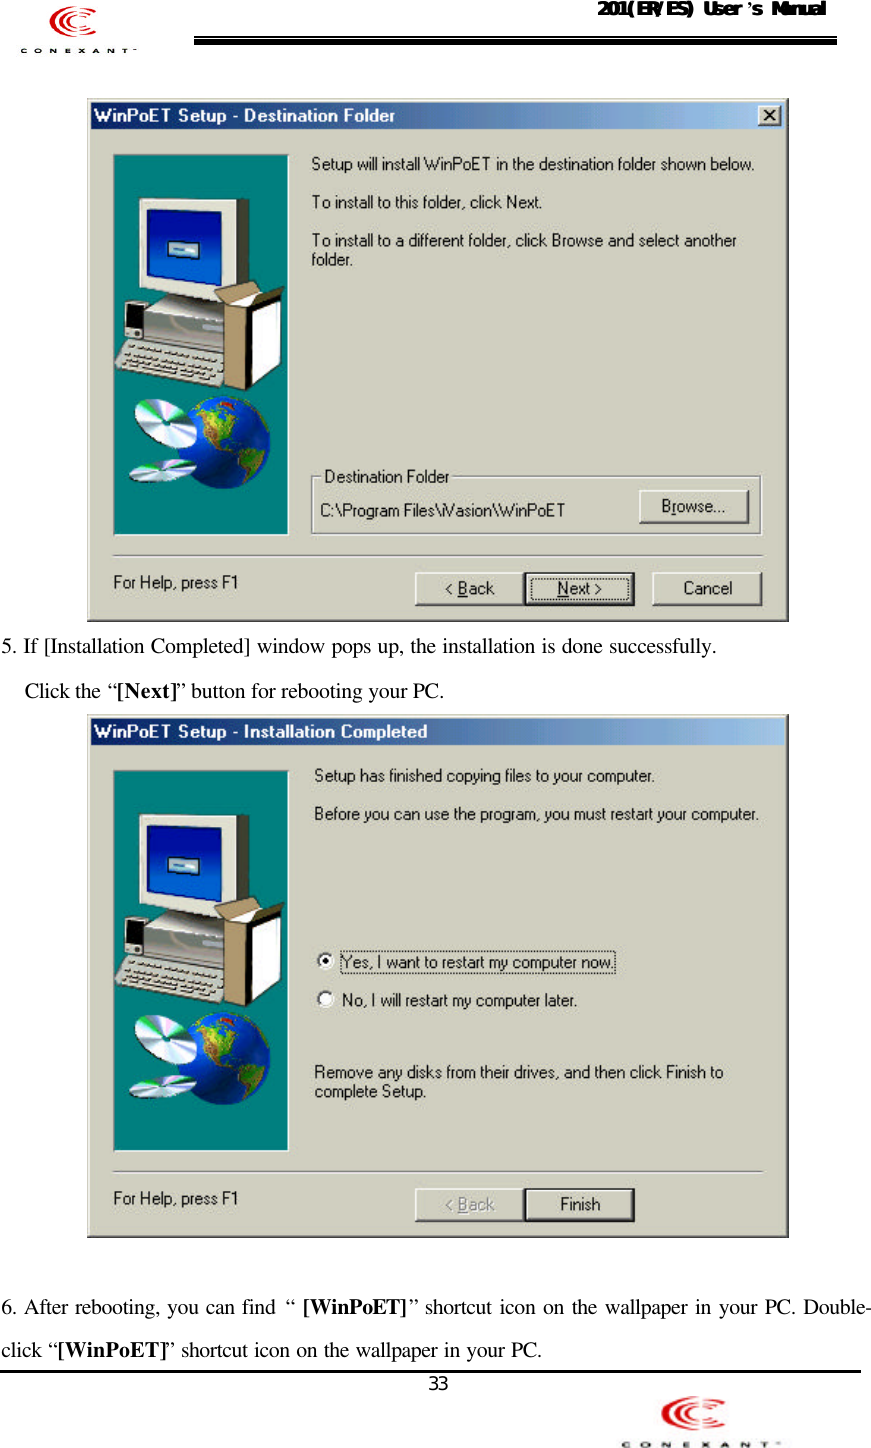                                                                                                                                                33201(ER/ES) User201(ER/ES) User ’s Manuals Manual     5. If [Installation Completed] window pops up, the installation is done successfully.   Click the “[Next]” button for rebooting your PC.    6. After rebooting, you can find “ [WinPoET]” shortcut icon on the wallpaper in your PC. Double-click “[WinPoET]” shortcut icon on the wallpaper in your PC. 